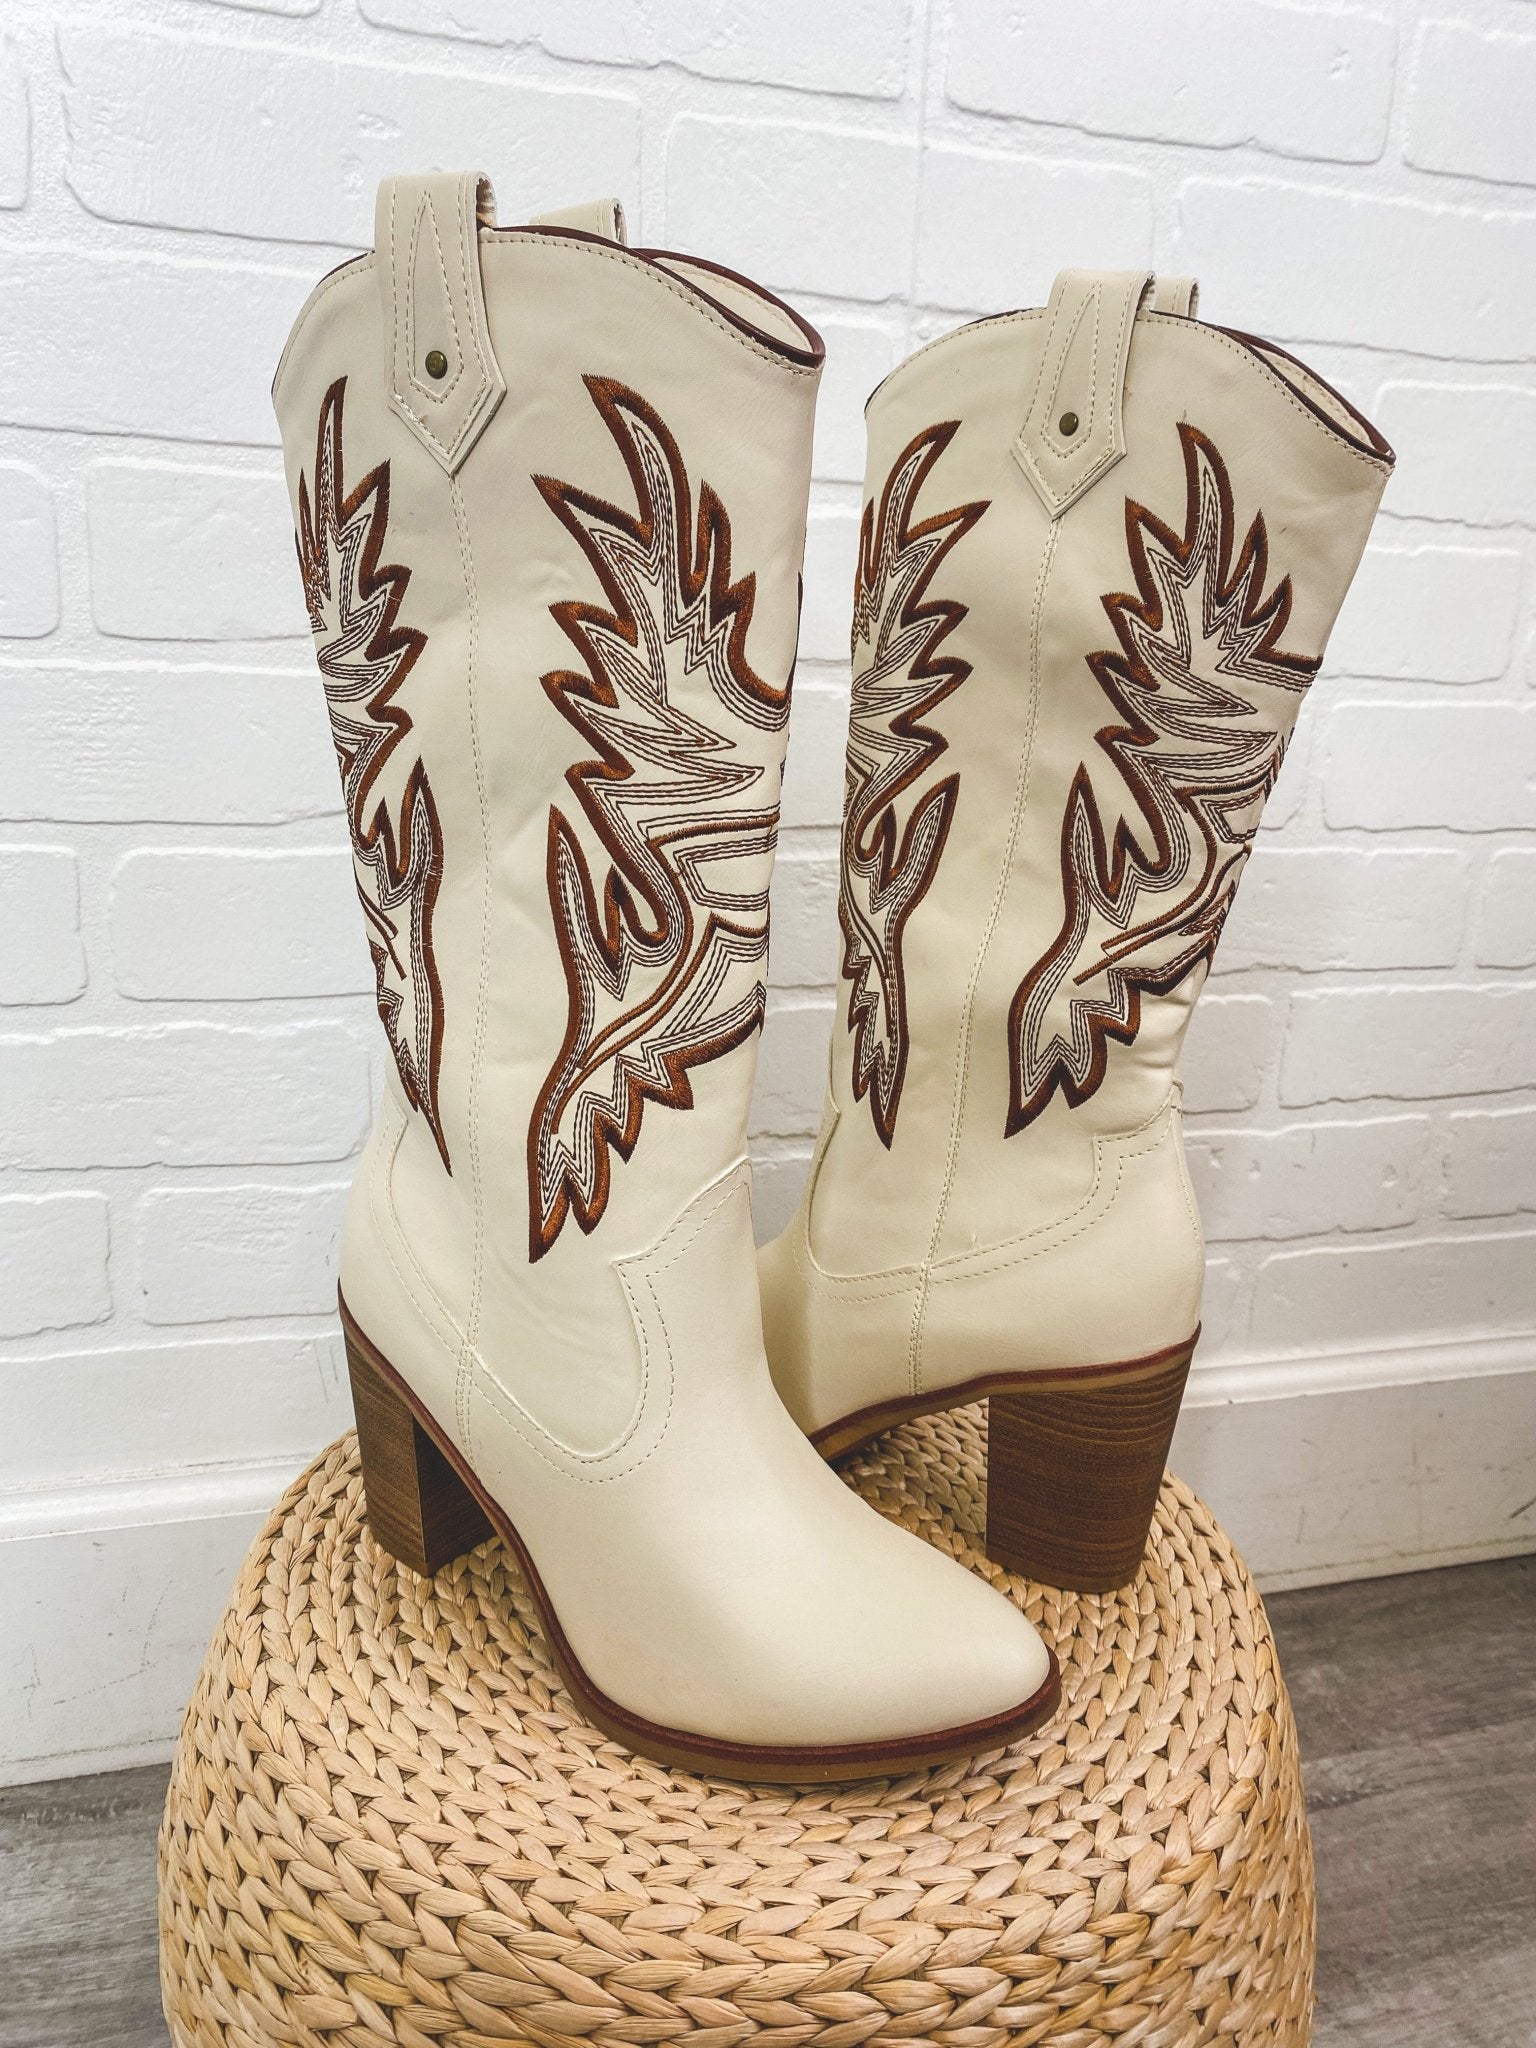 Taley western boot ivory - Trendy boots - Fashion Shoes at Lush Fashion Lounge Boutique in Oklahoma City